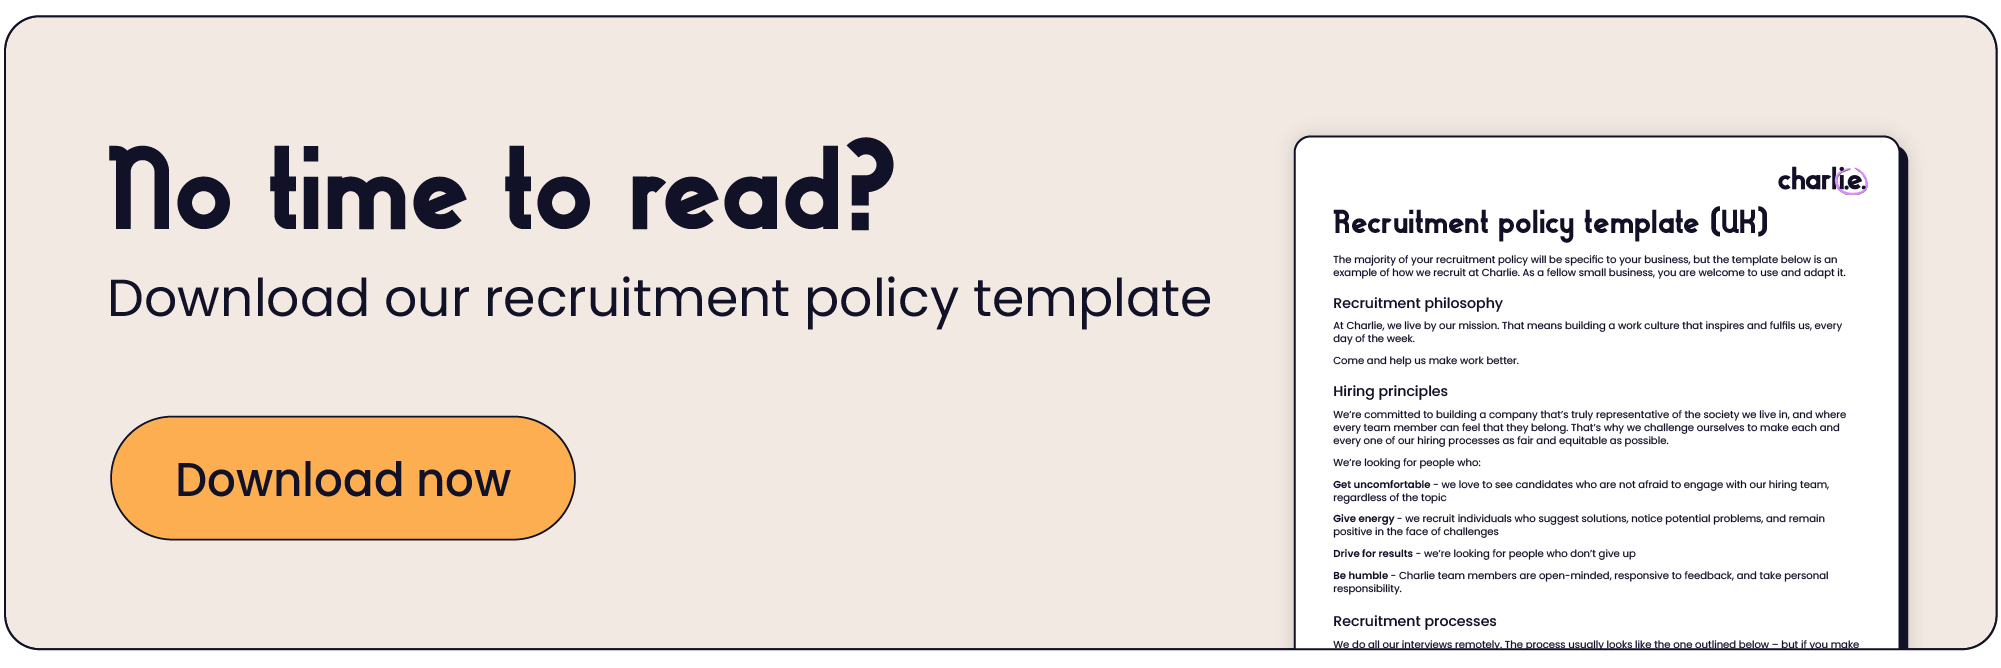 Download our recruitment policy template-02.webp